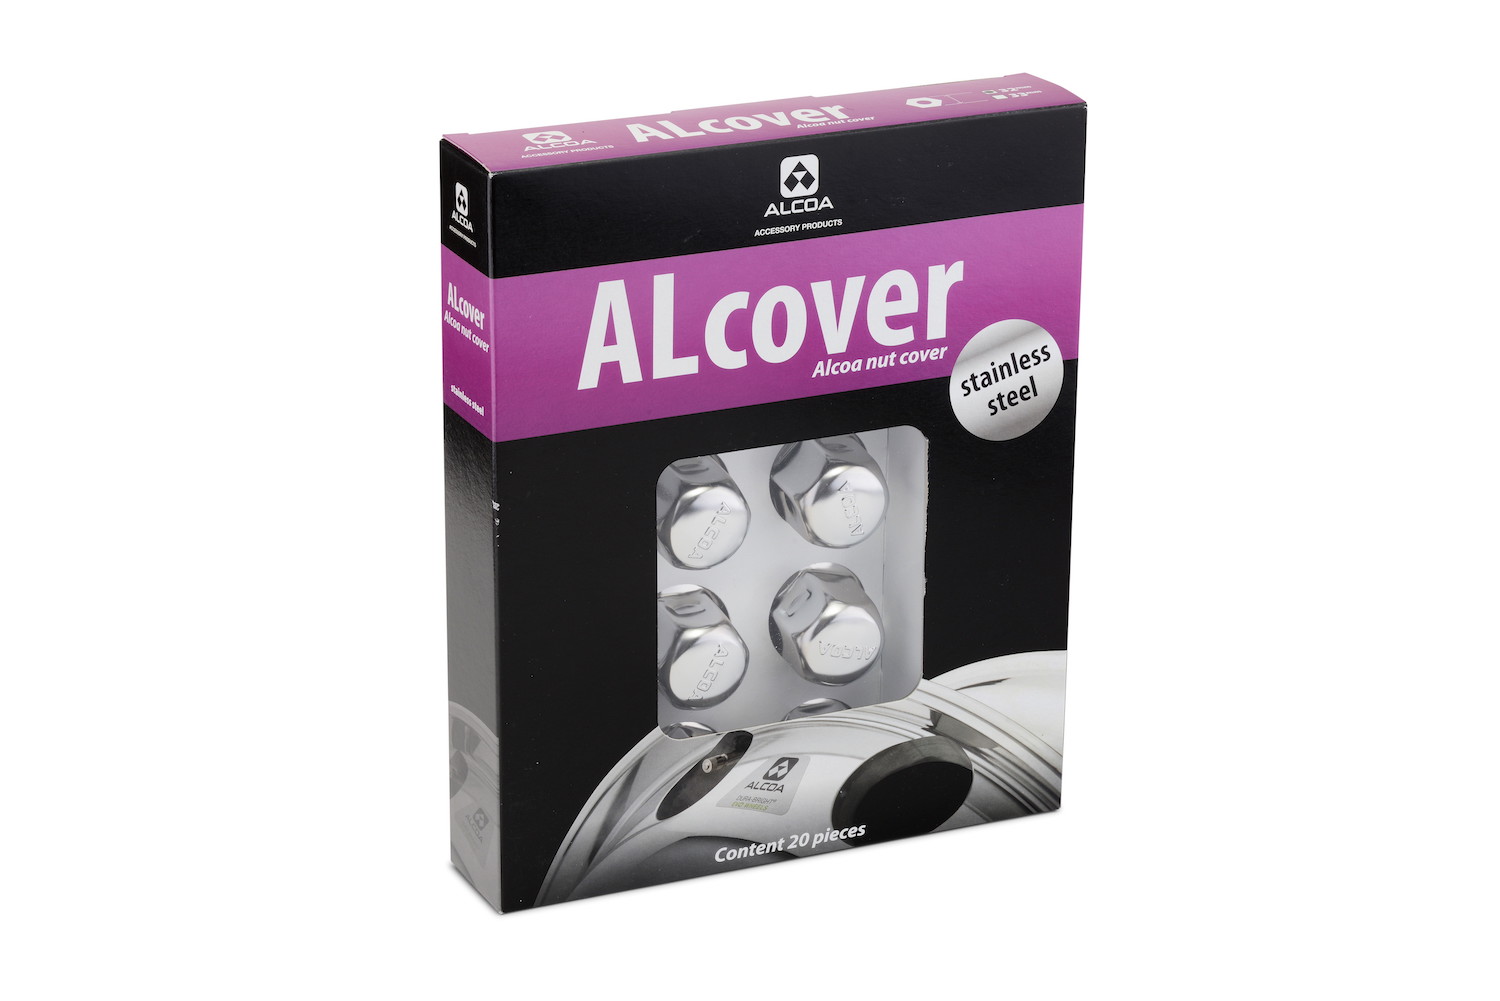 stainless-steel-alcover-1